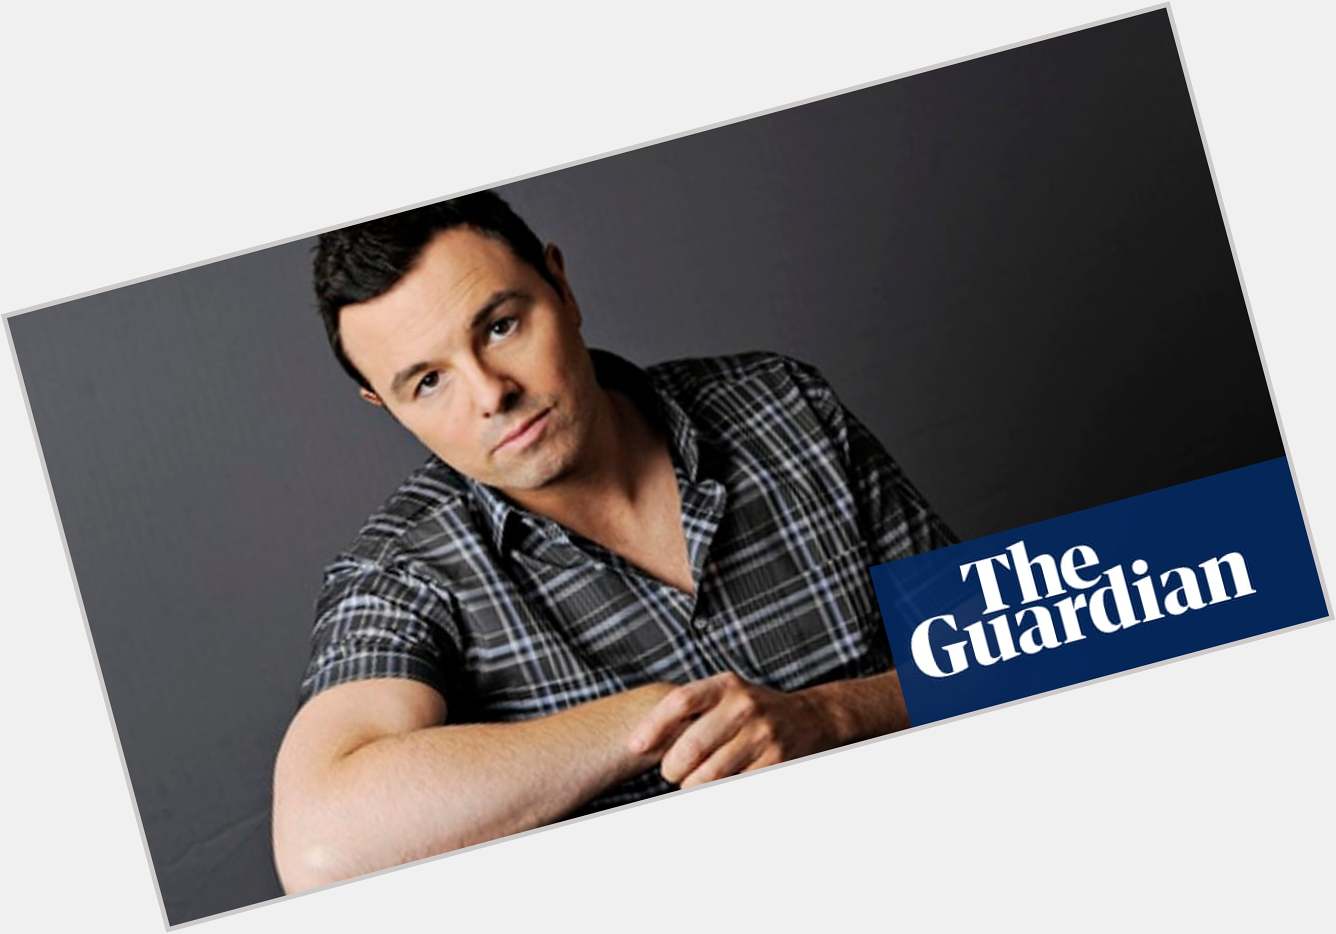 Happy 49th birthday to mr. Seth MacFarlane been a fan of family guy since 2008 such a hot dude 